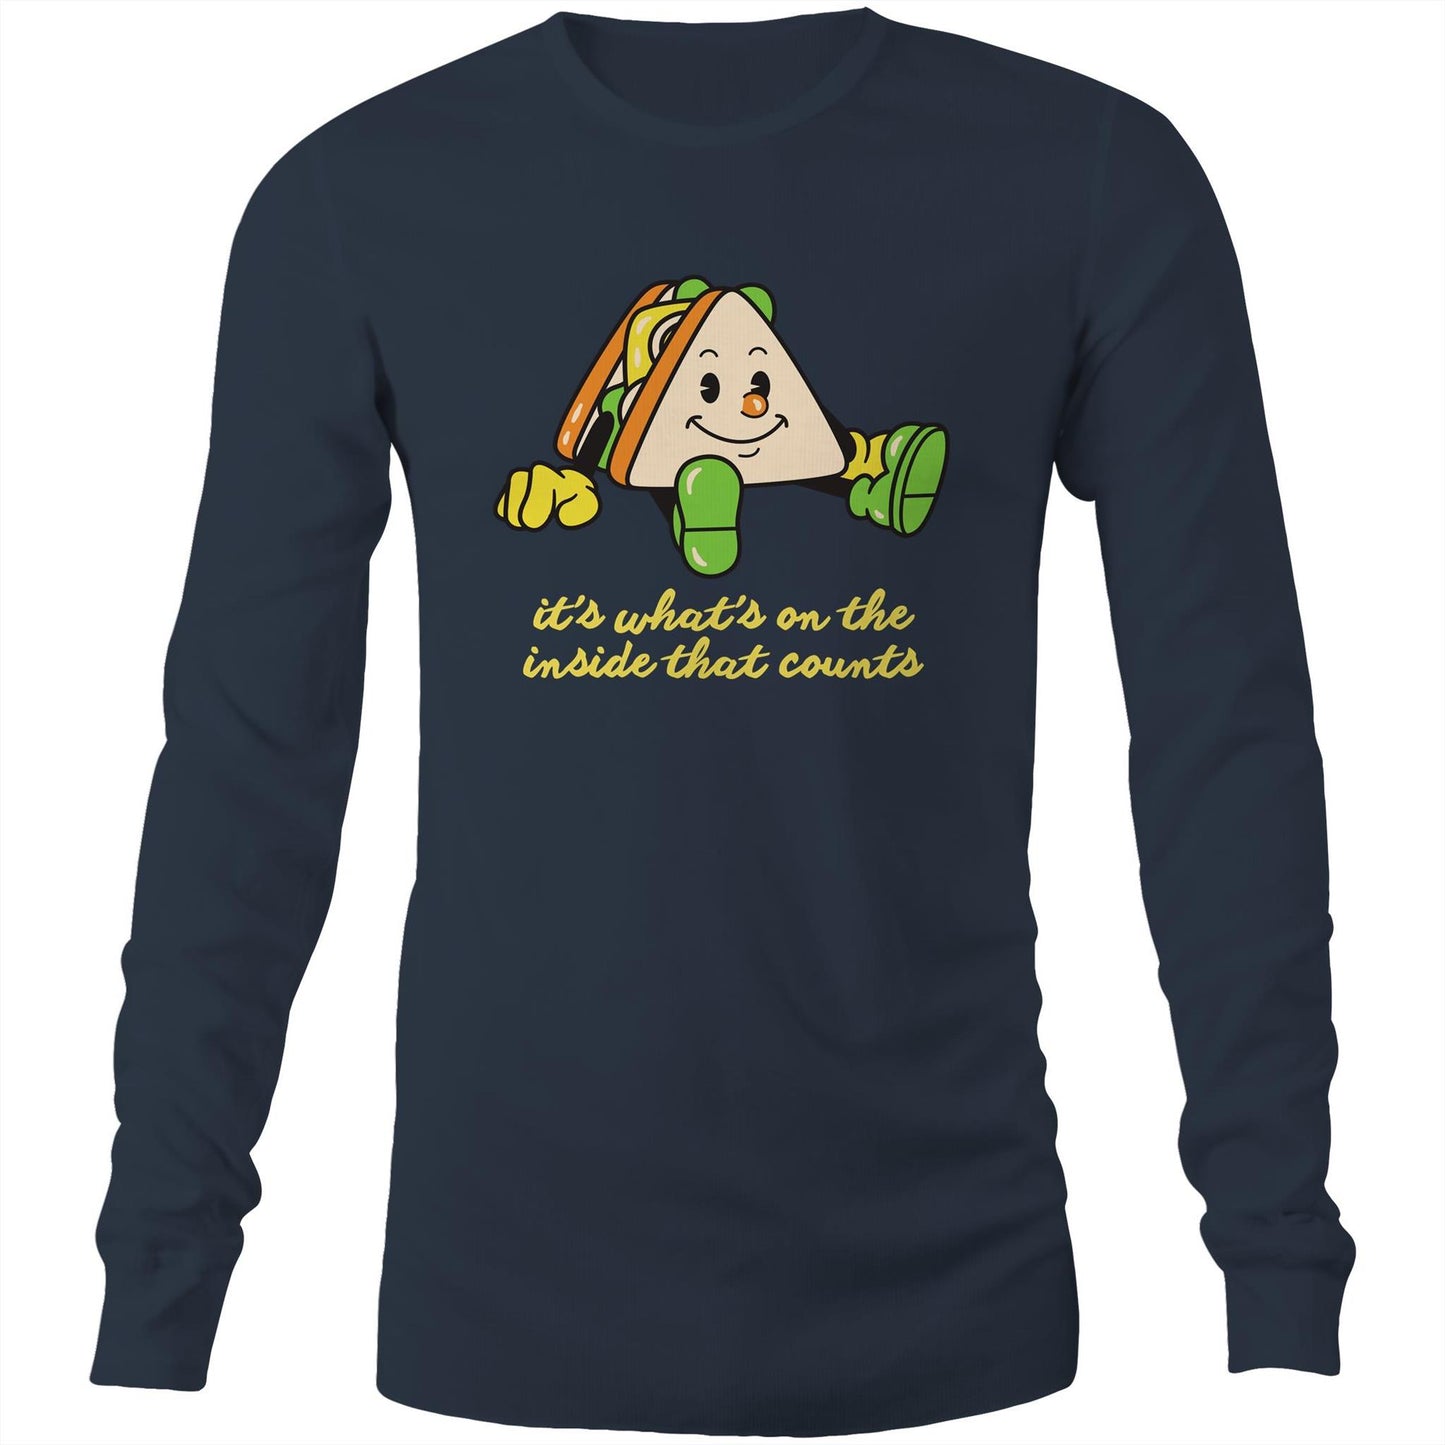 Sandwich, It's What's On The Inside That Counts - Long Sleeve T-Shirt Navy Unisex Long Sleeve T-shirt Food Motivation